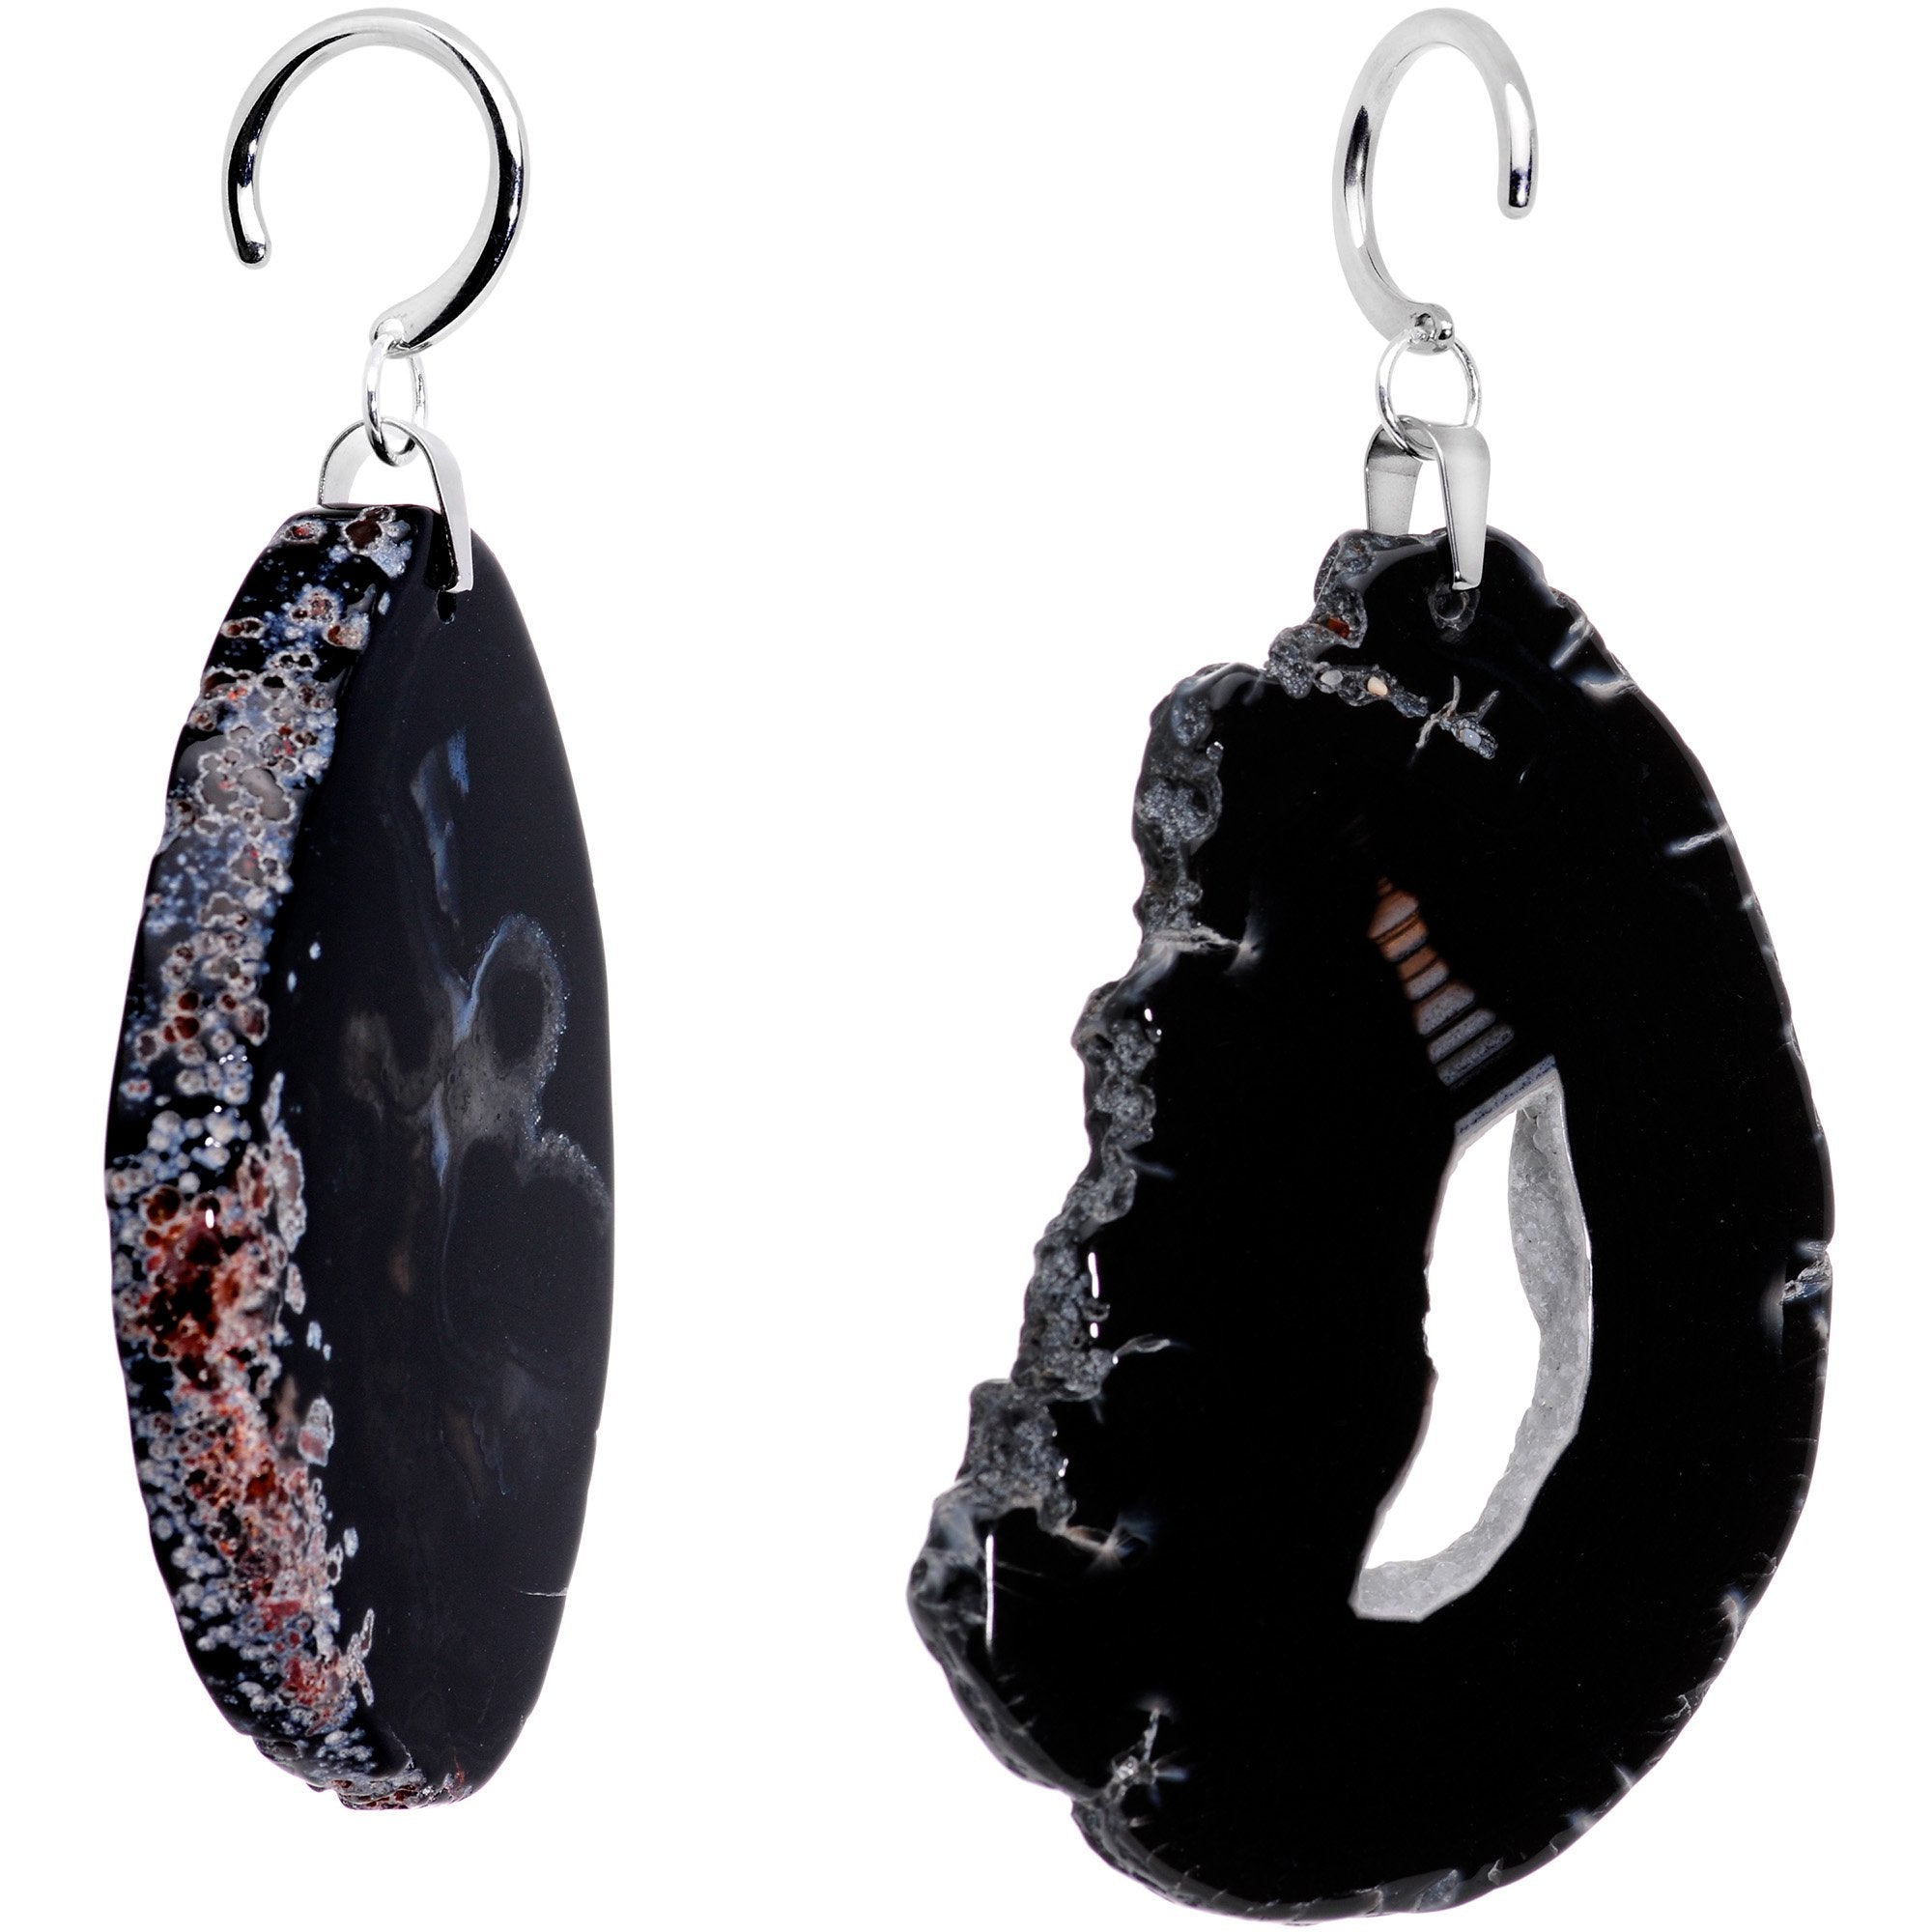 Handcrafted Steel Midnight Shadow Gap Natural Black Agate Ear Weights